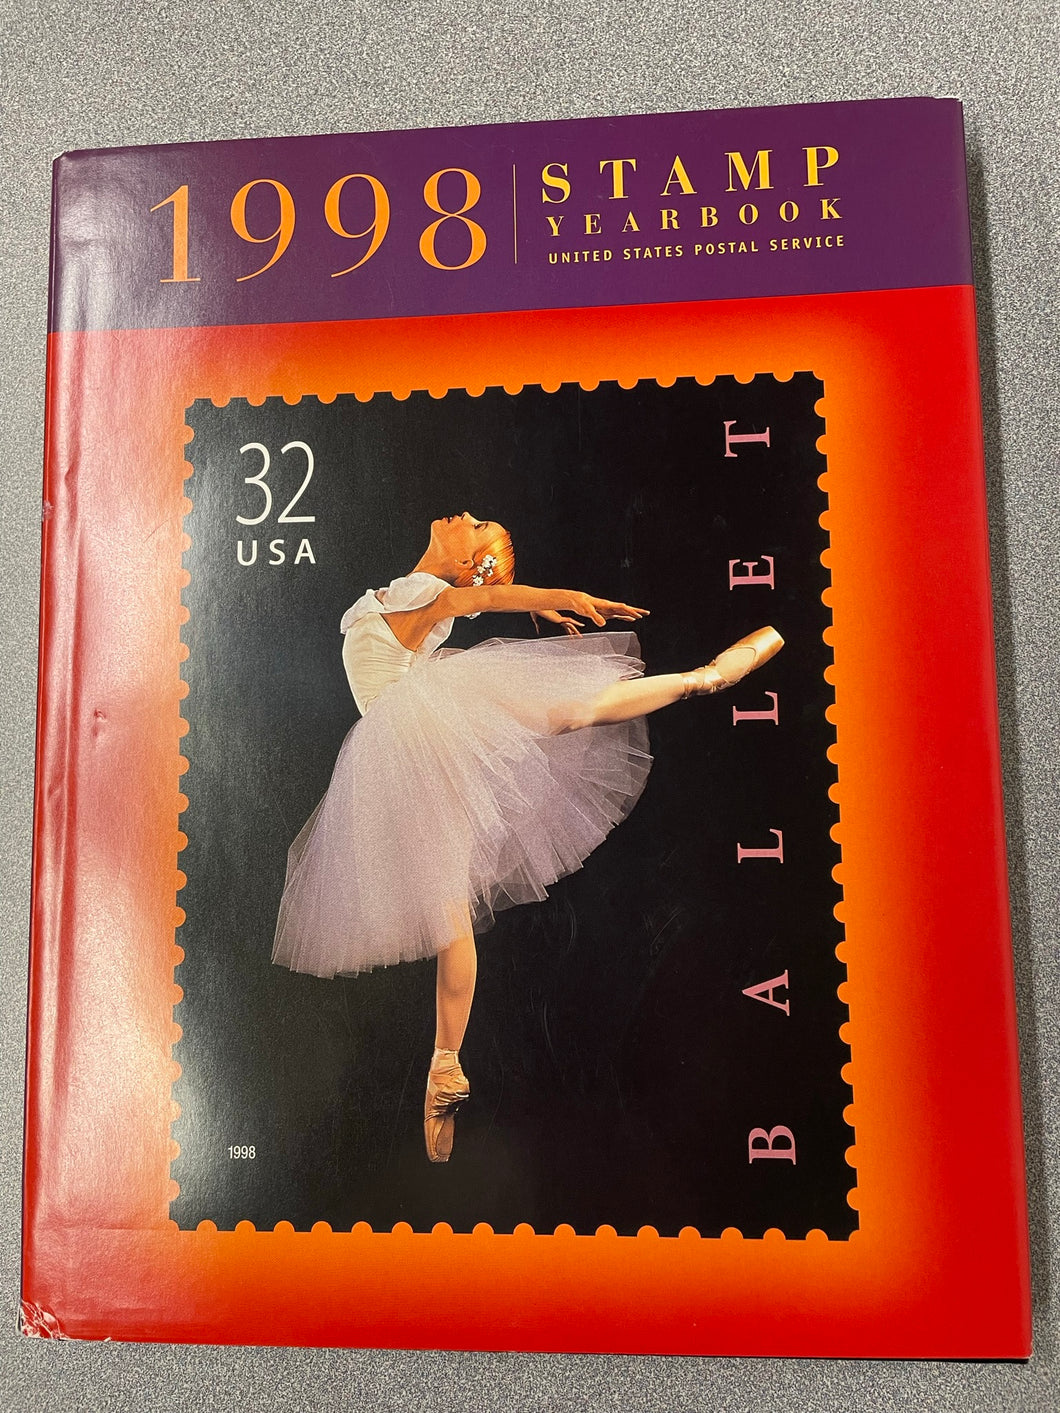 1998 Stamp Yearbook/ United States Postal Service, Smith, Steven, [1998] H 1/23